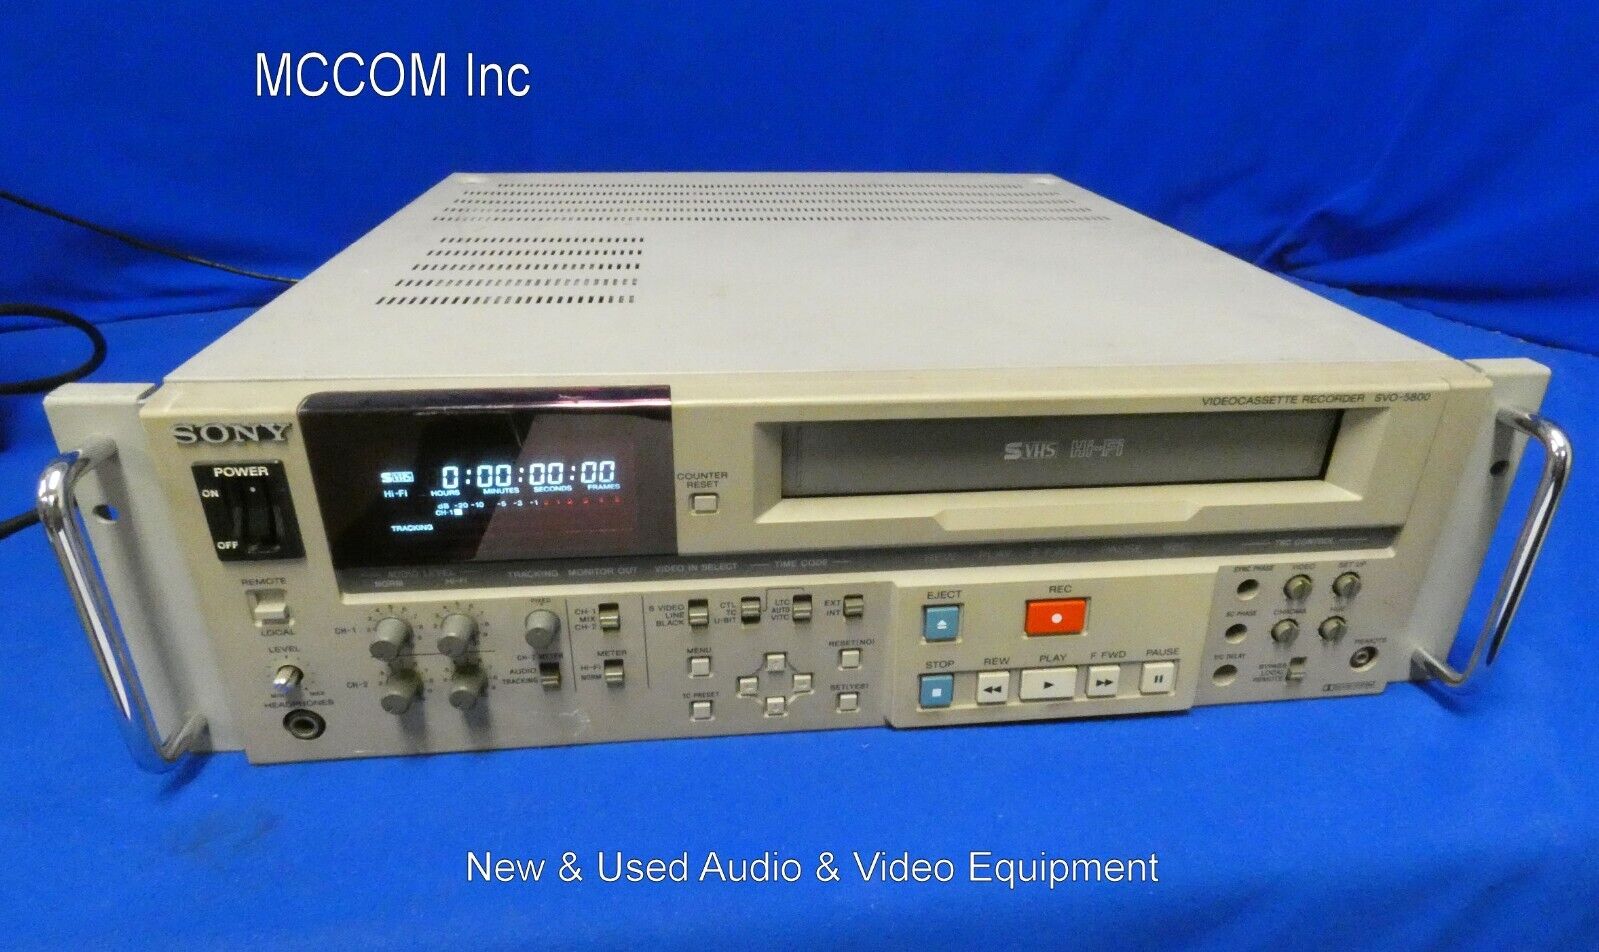 Sony Svo-5800 Svhs Videocassette Recorder W/ 425 Drum Hrs, Rack Ears